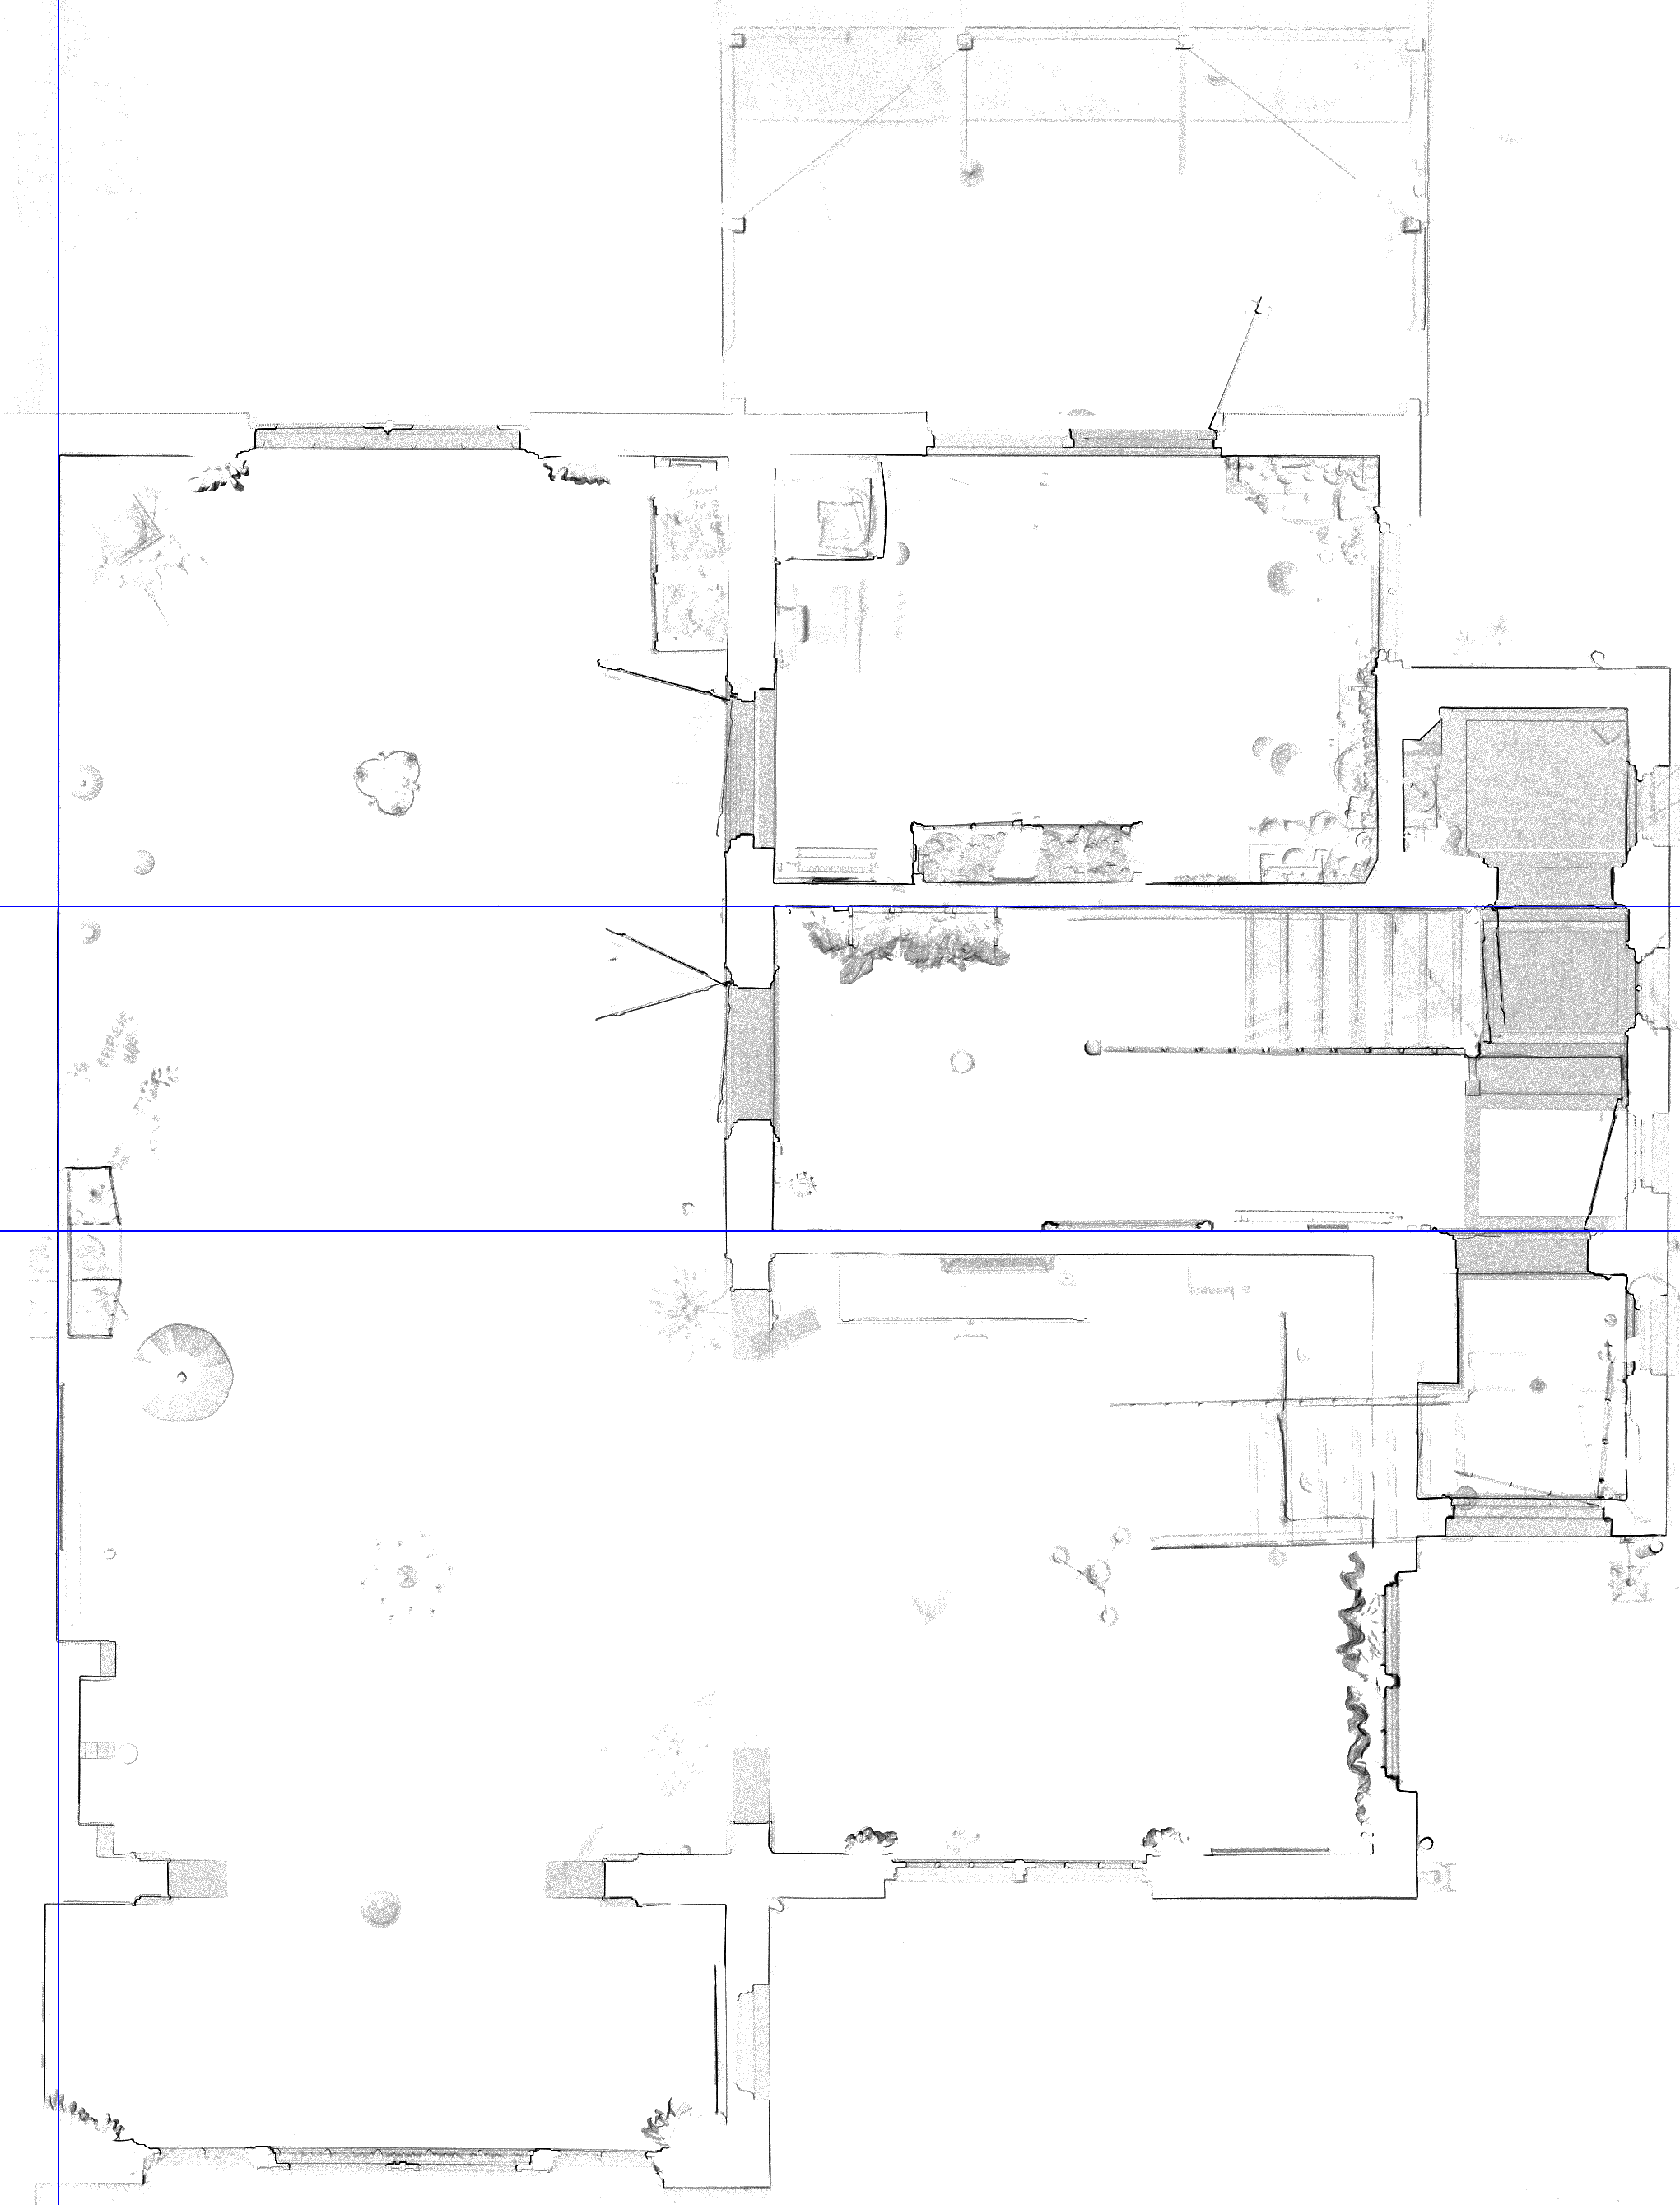 Plans and elevations from Laser Scans